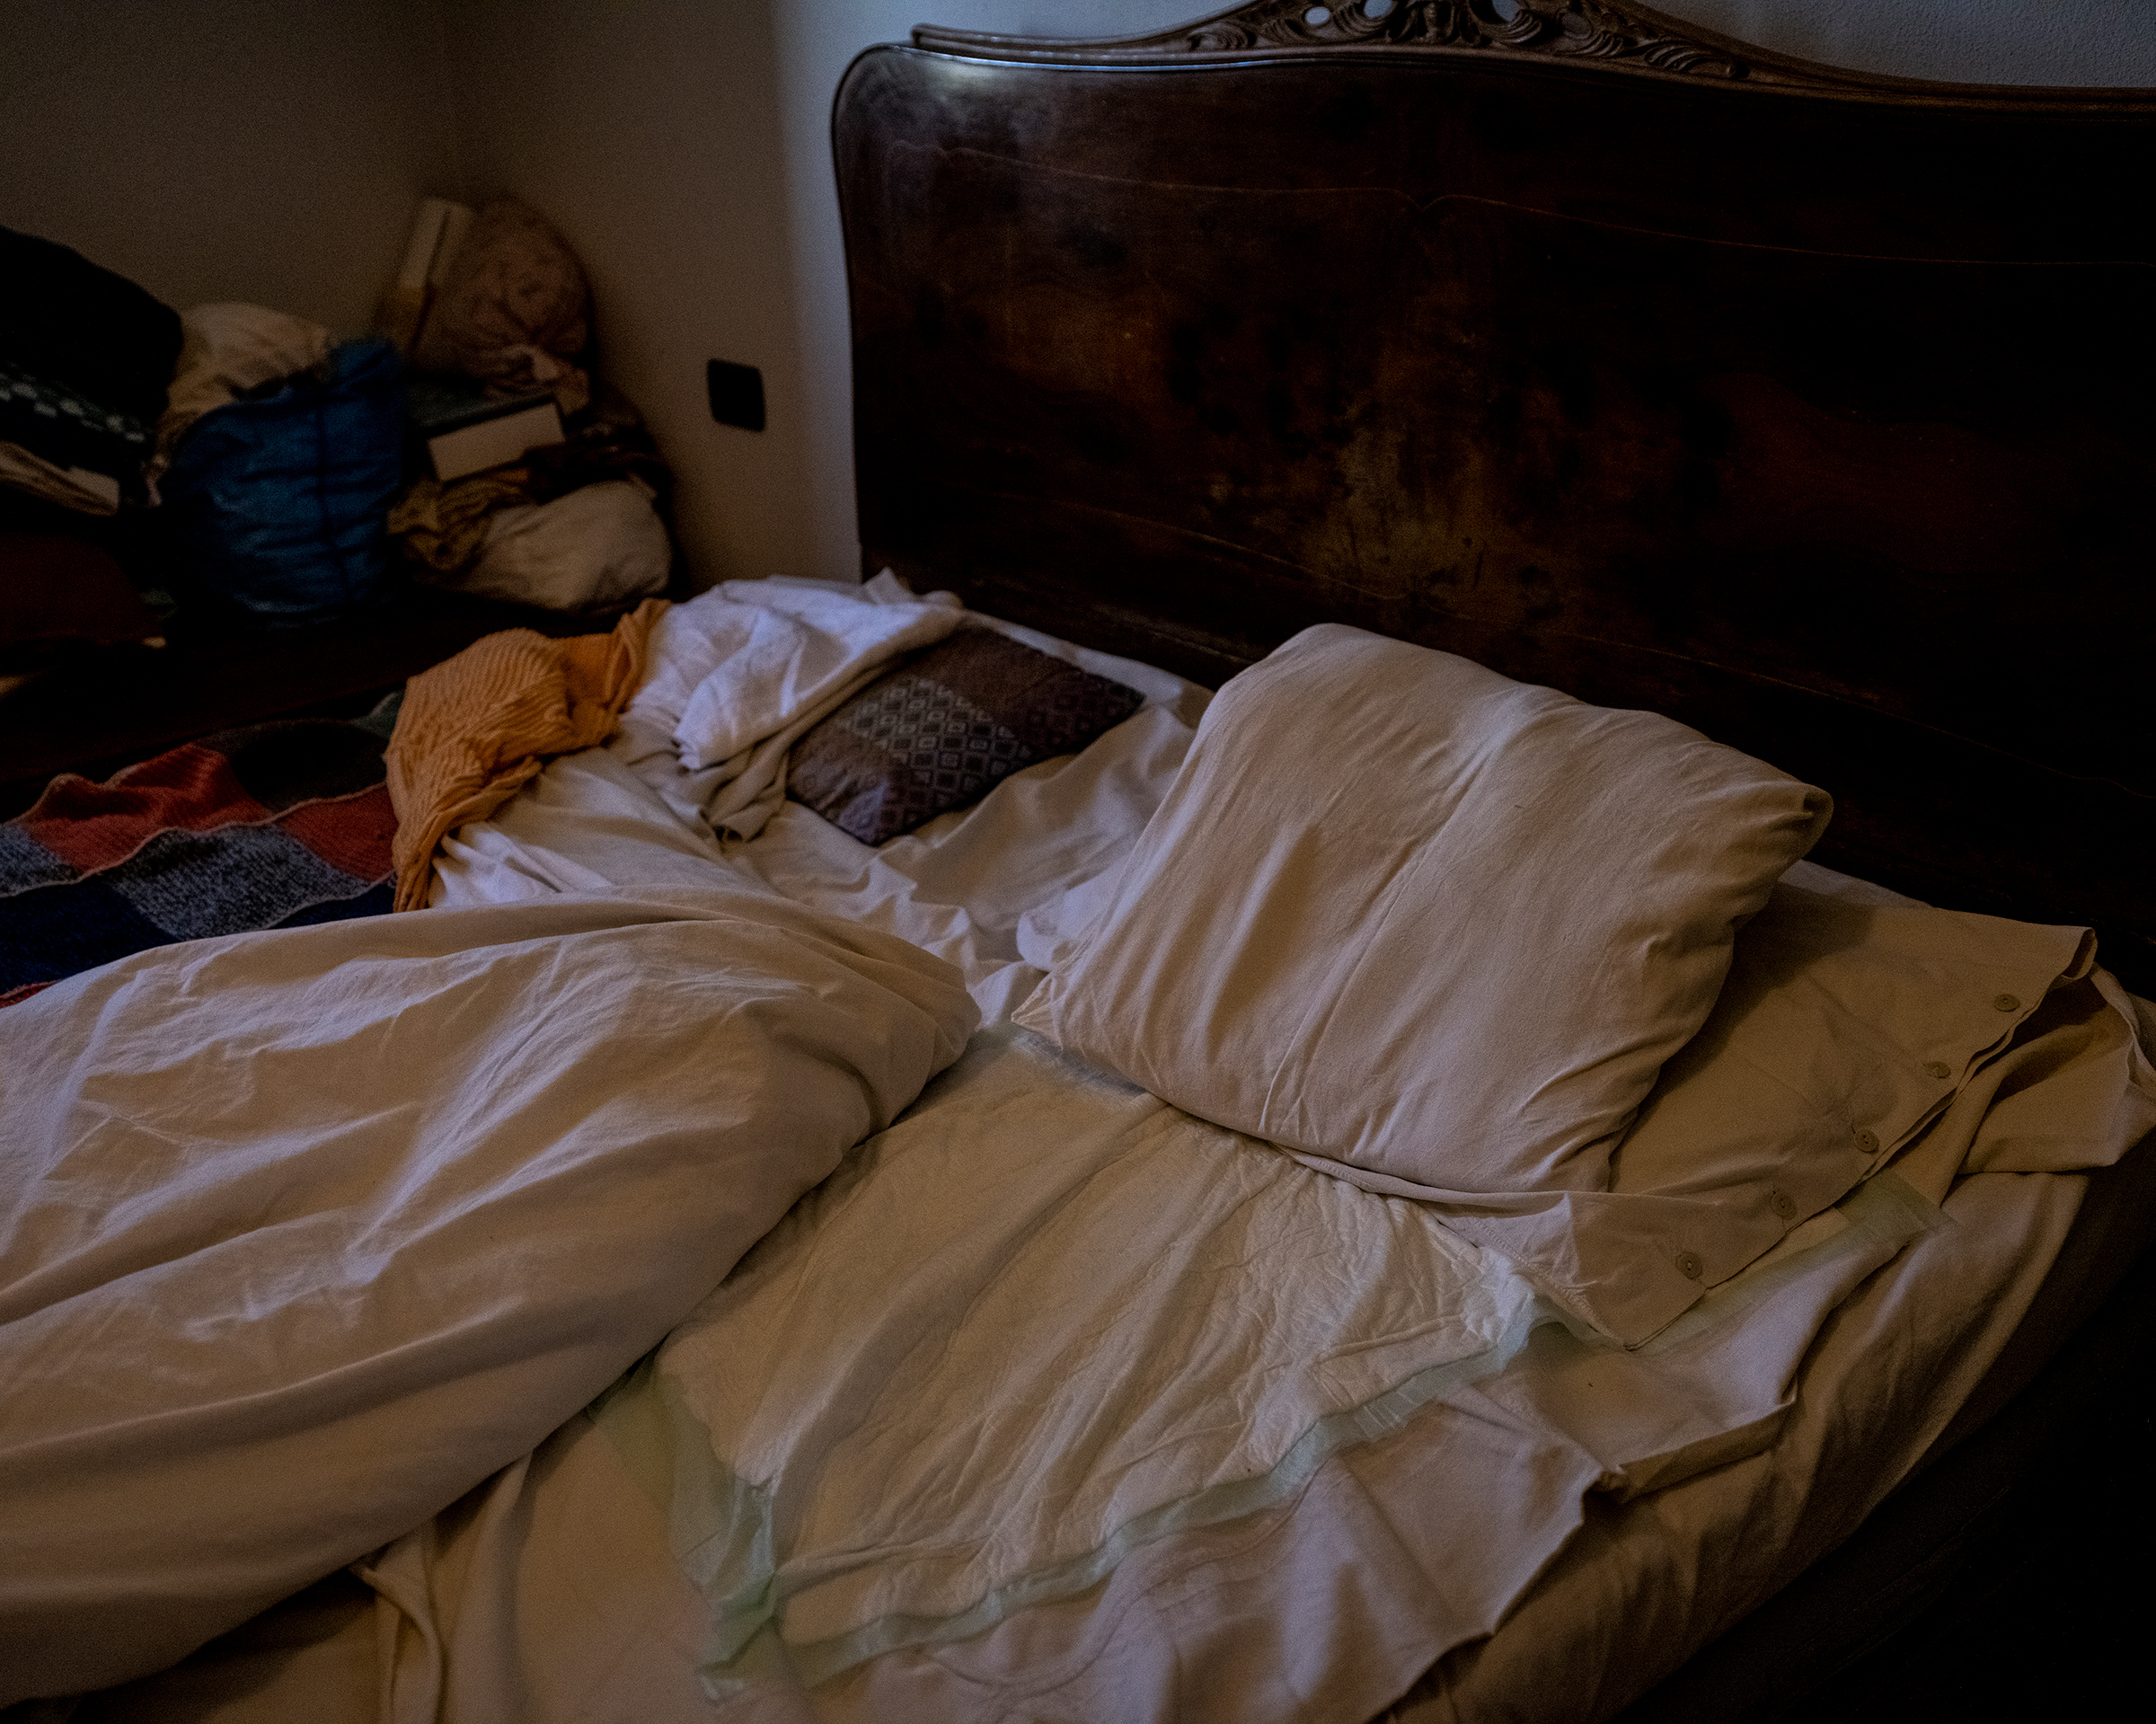 The woman's empty bed after emergency workers took her to the hospital. (Lorenzo Meloni—Magnum Photos for TIME)